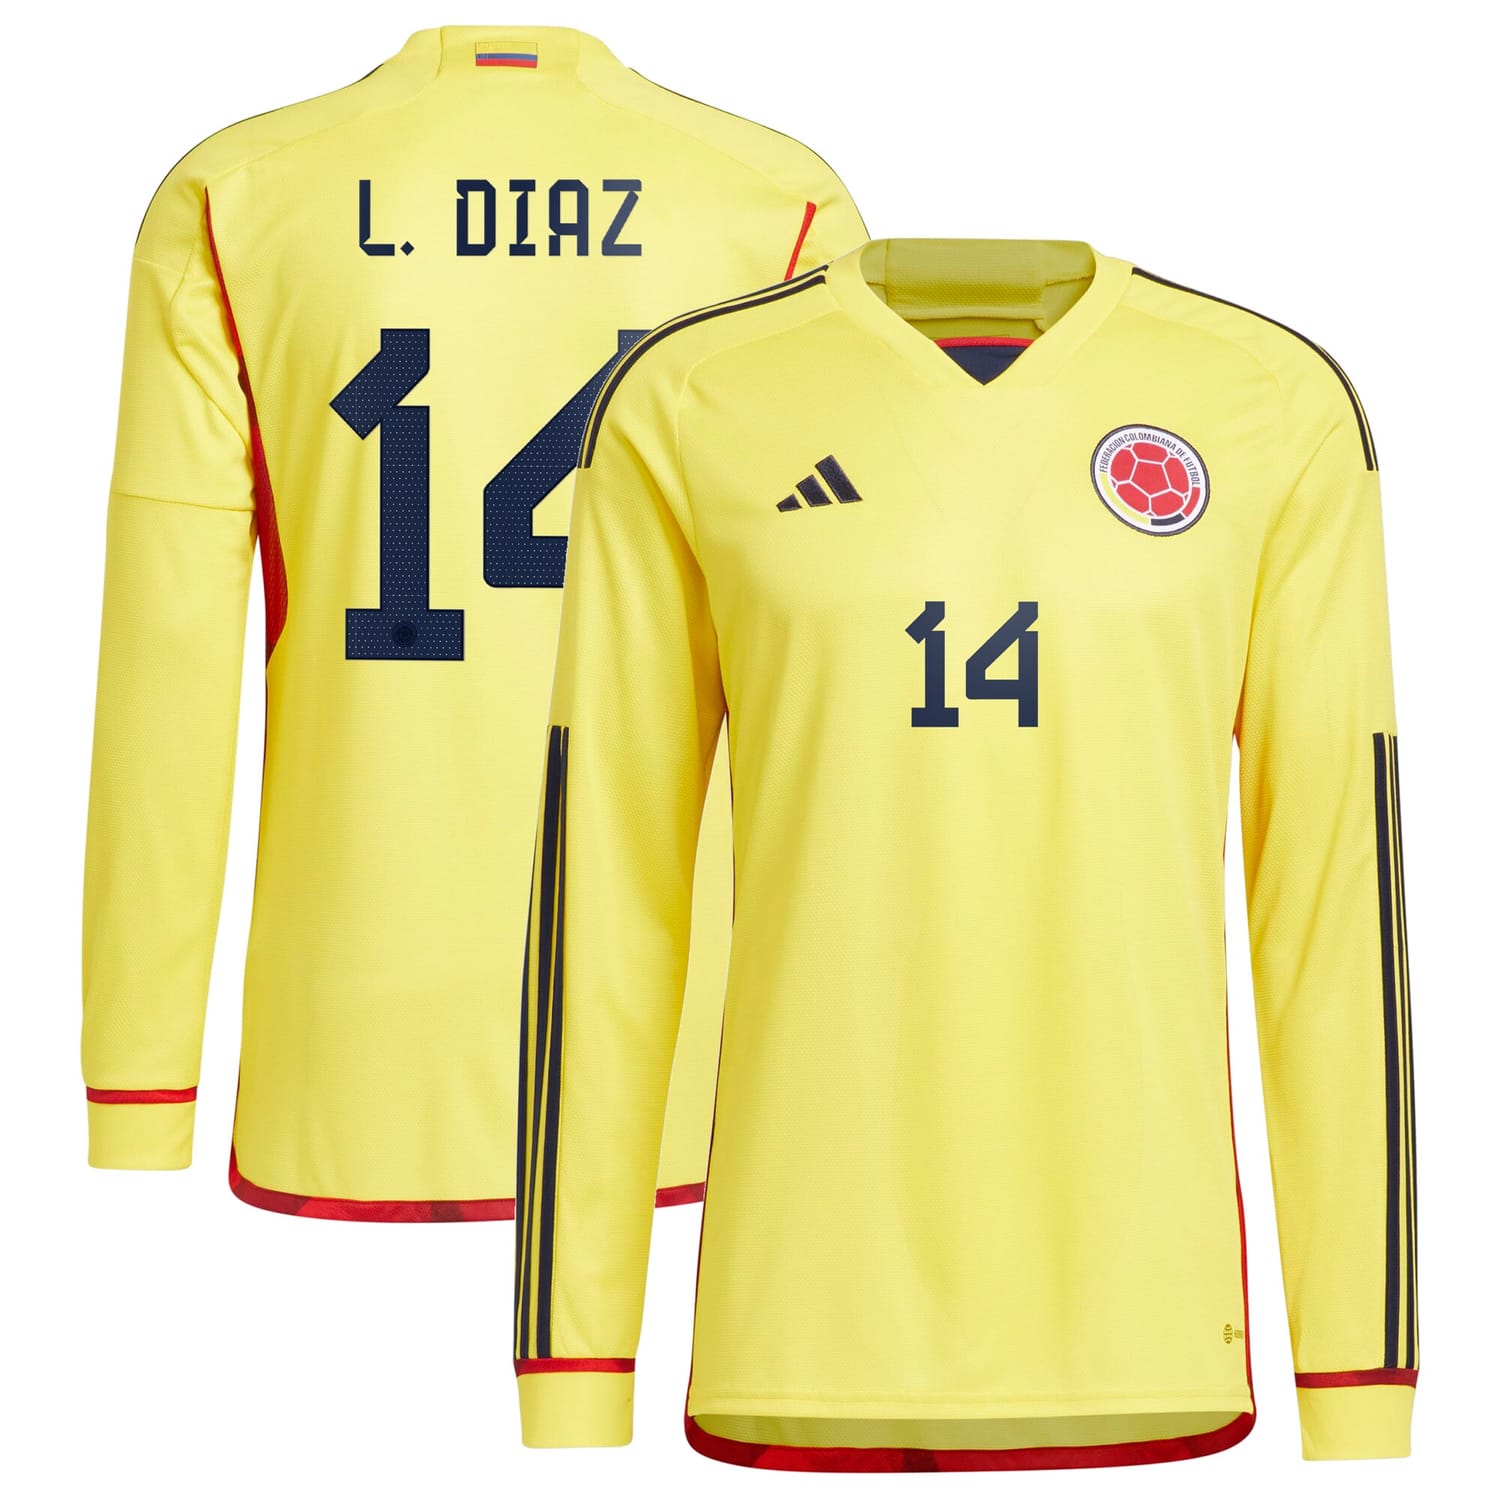 Colombia National Team Home Jersey Shirt Long Sleeve Yellow 2022-23 player Luis Diaz printing for Men